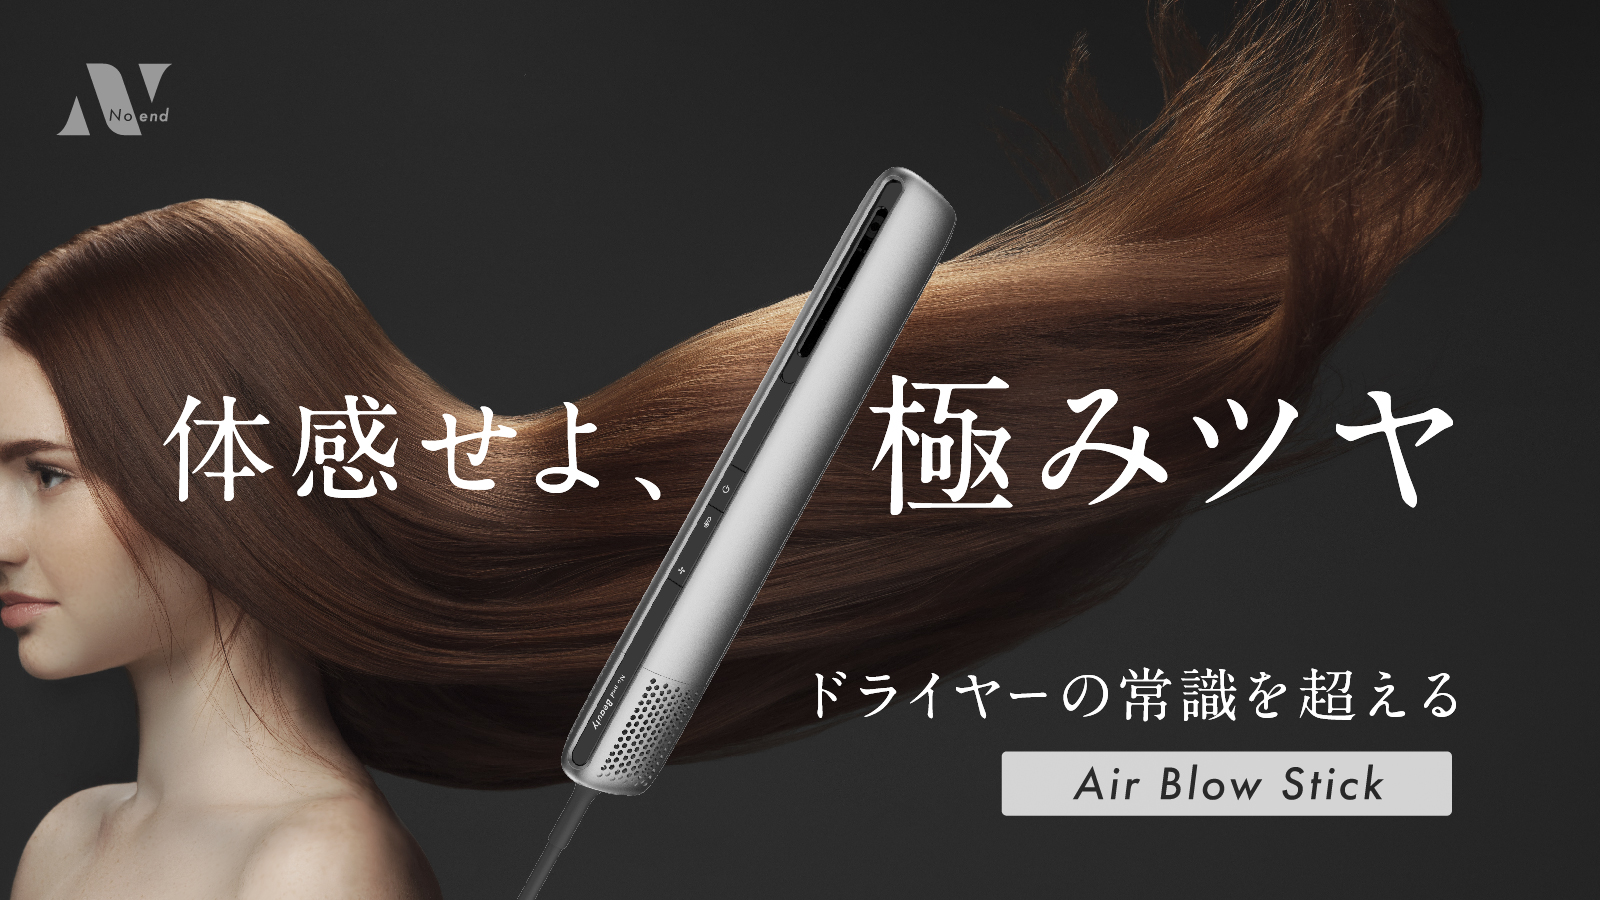 Noend Air Blow Stick NB-HD-001 トリートメント